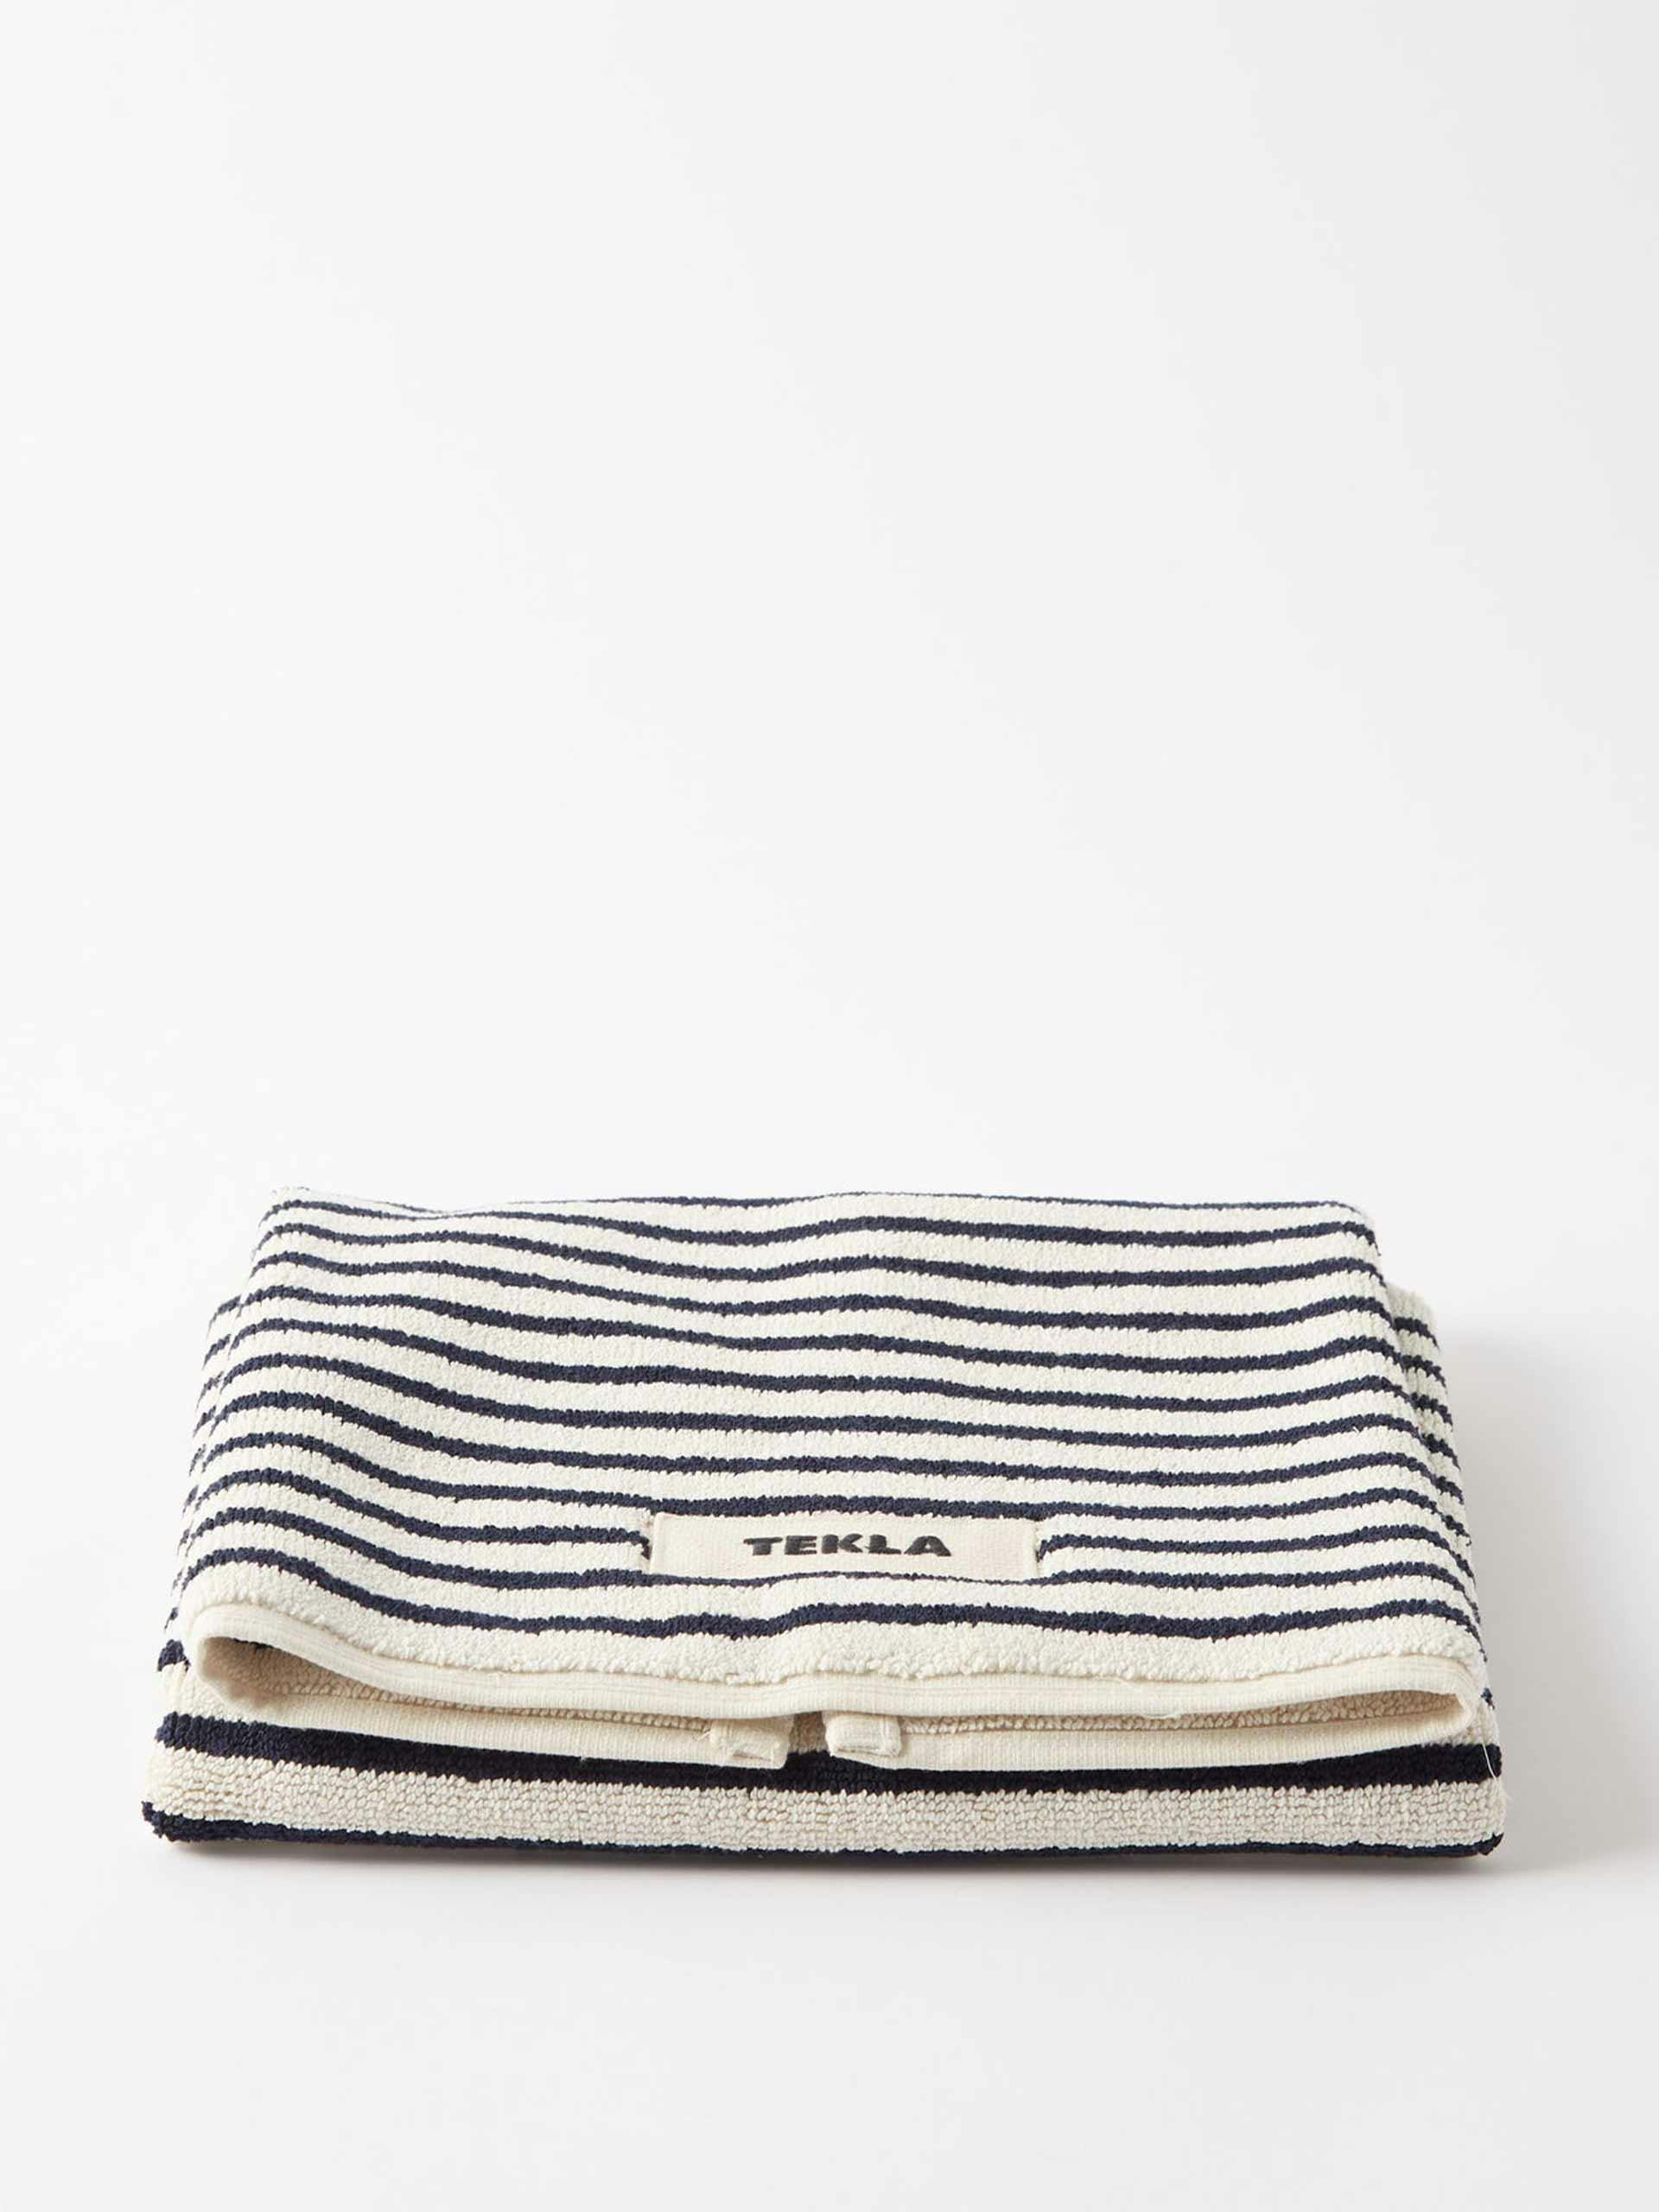 Navy and white striped bath mat